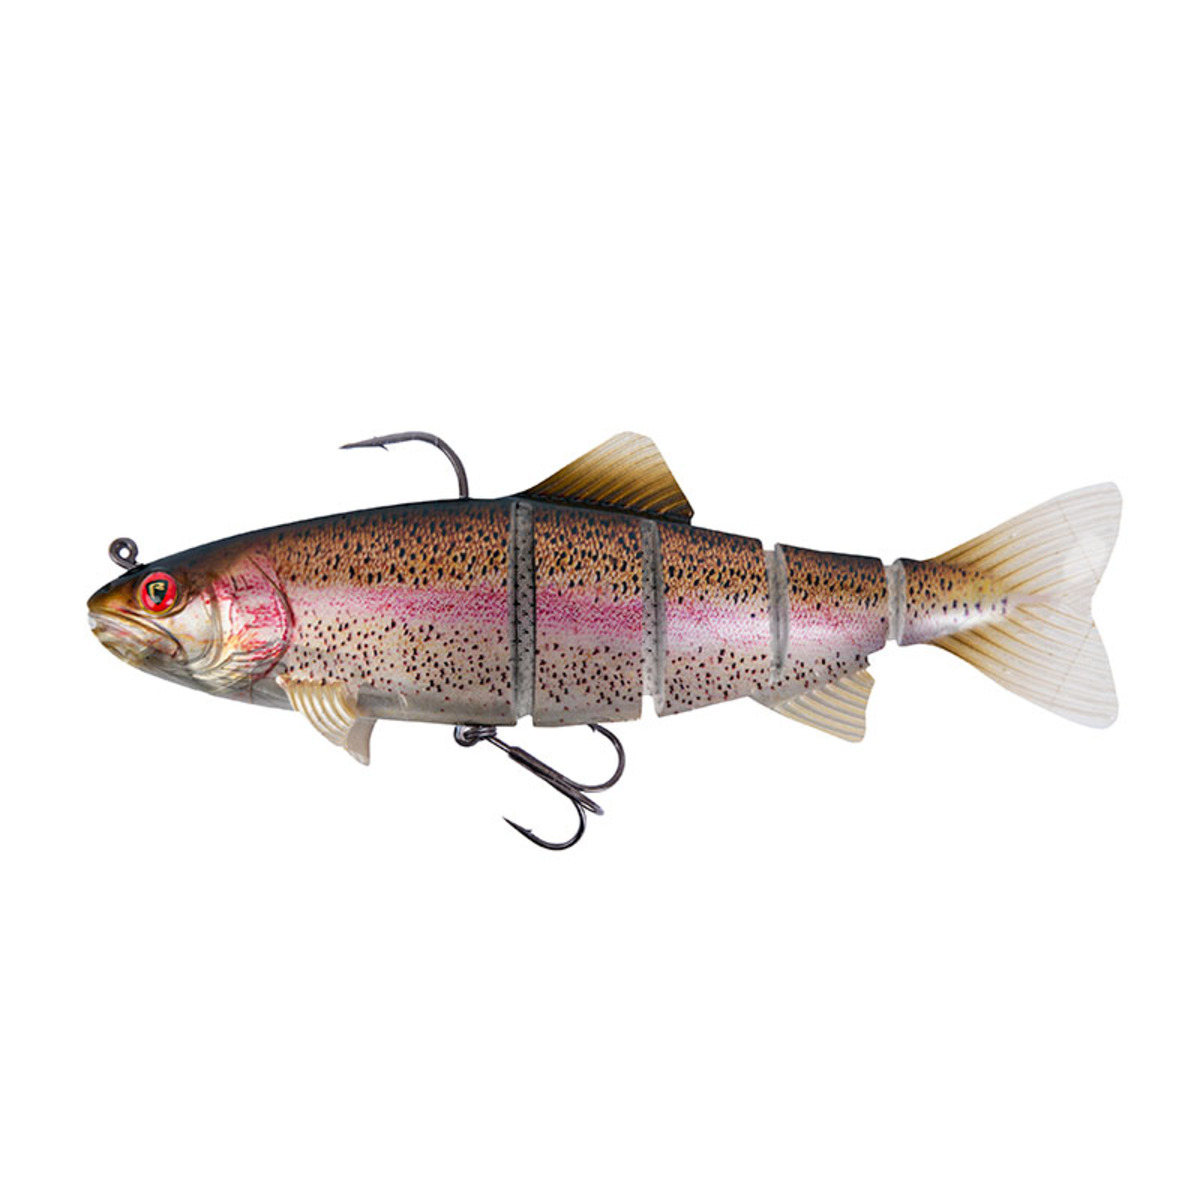 Fox Rage Realistic Replicant Trout Jointed 14 Cm/5.5 50g - Super Natural Rainbow Trout x 1pcs